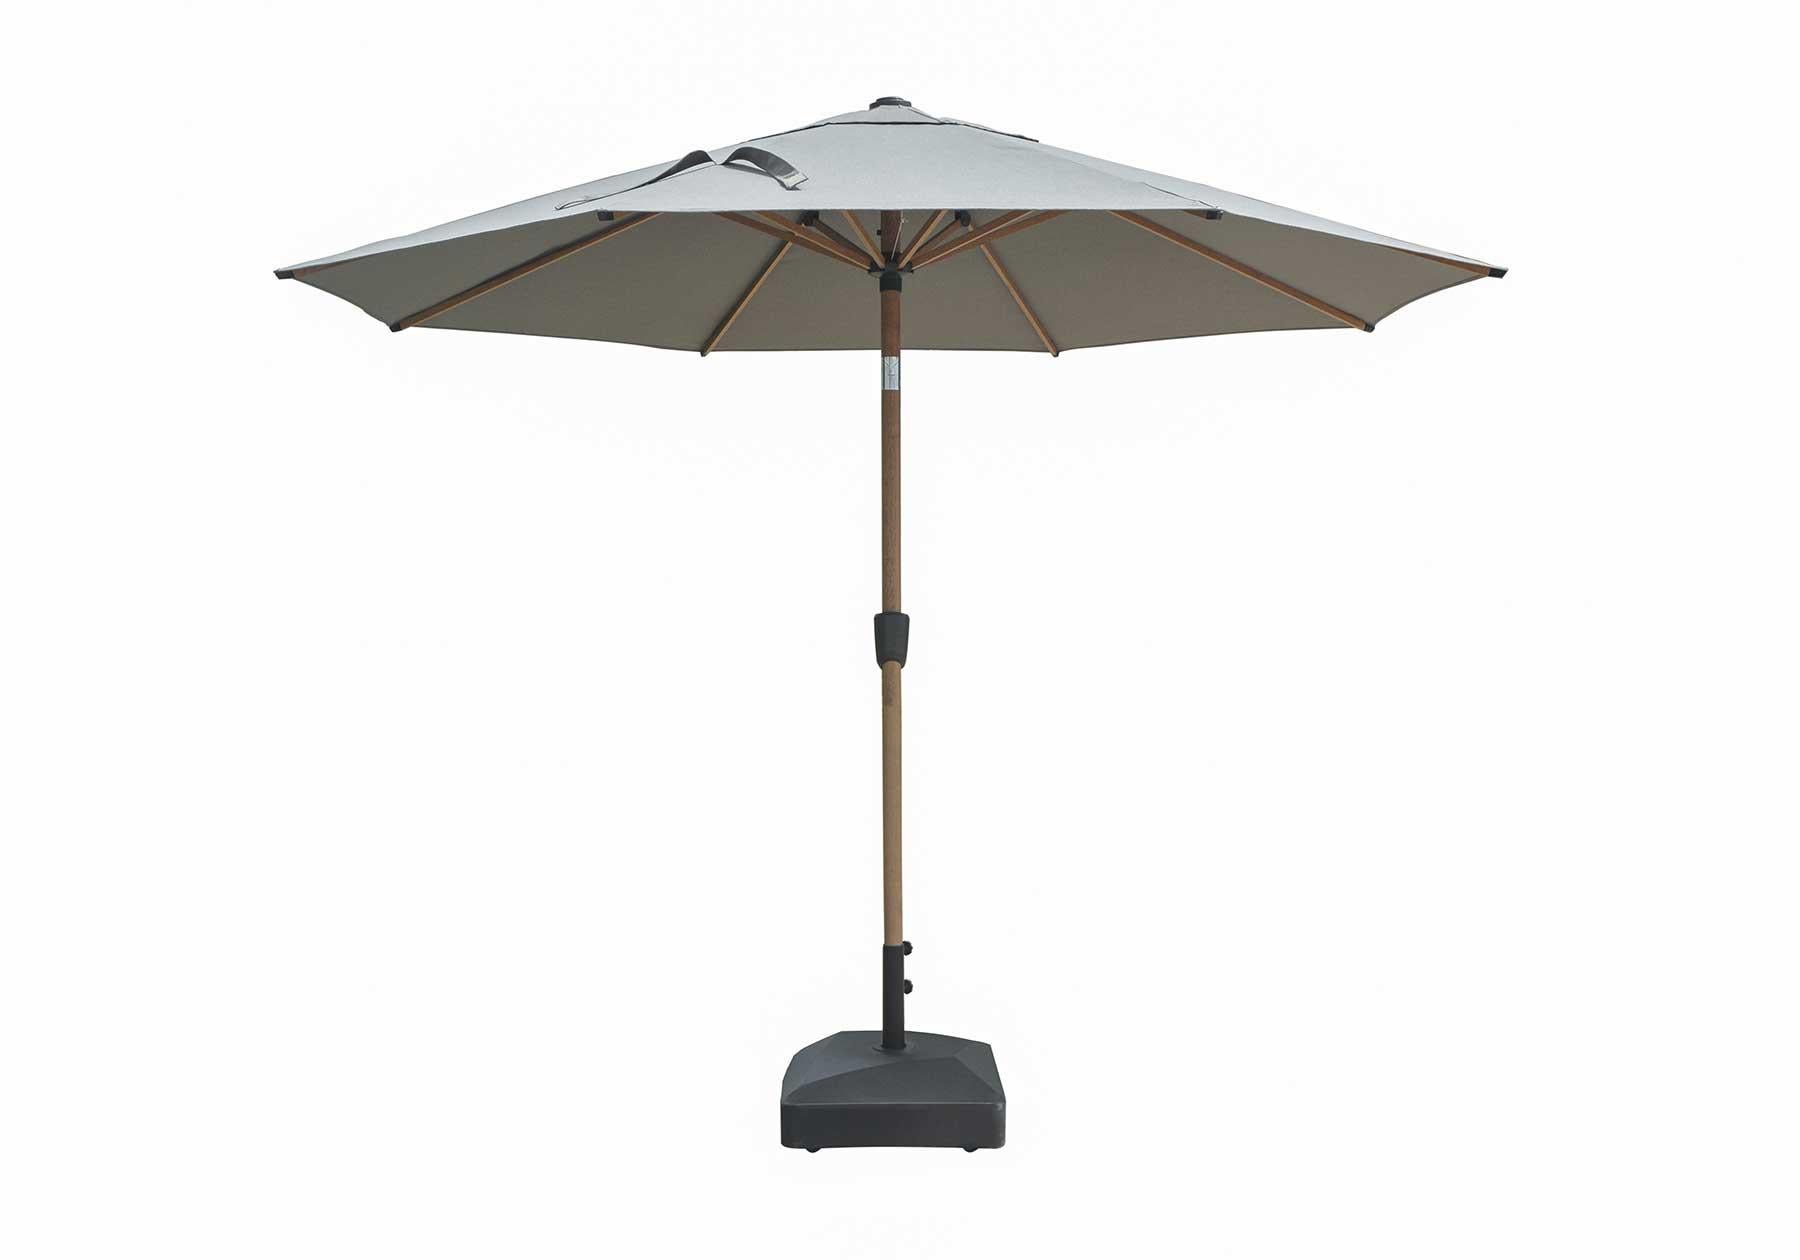 Agate Umbrella combines UV-resistant and wind-resistant special fabric and aluminum skeleton synthesis with modern design lines. While creating a modern look with aesthetic refinement in your outdoor areas; Agate umbrella, which allows you to create